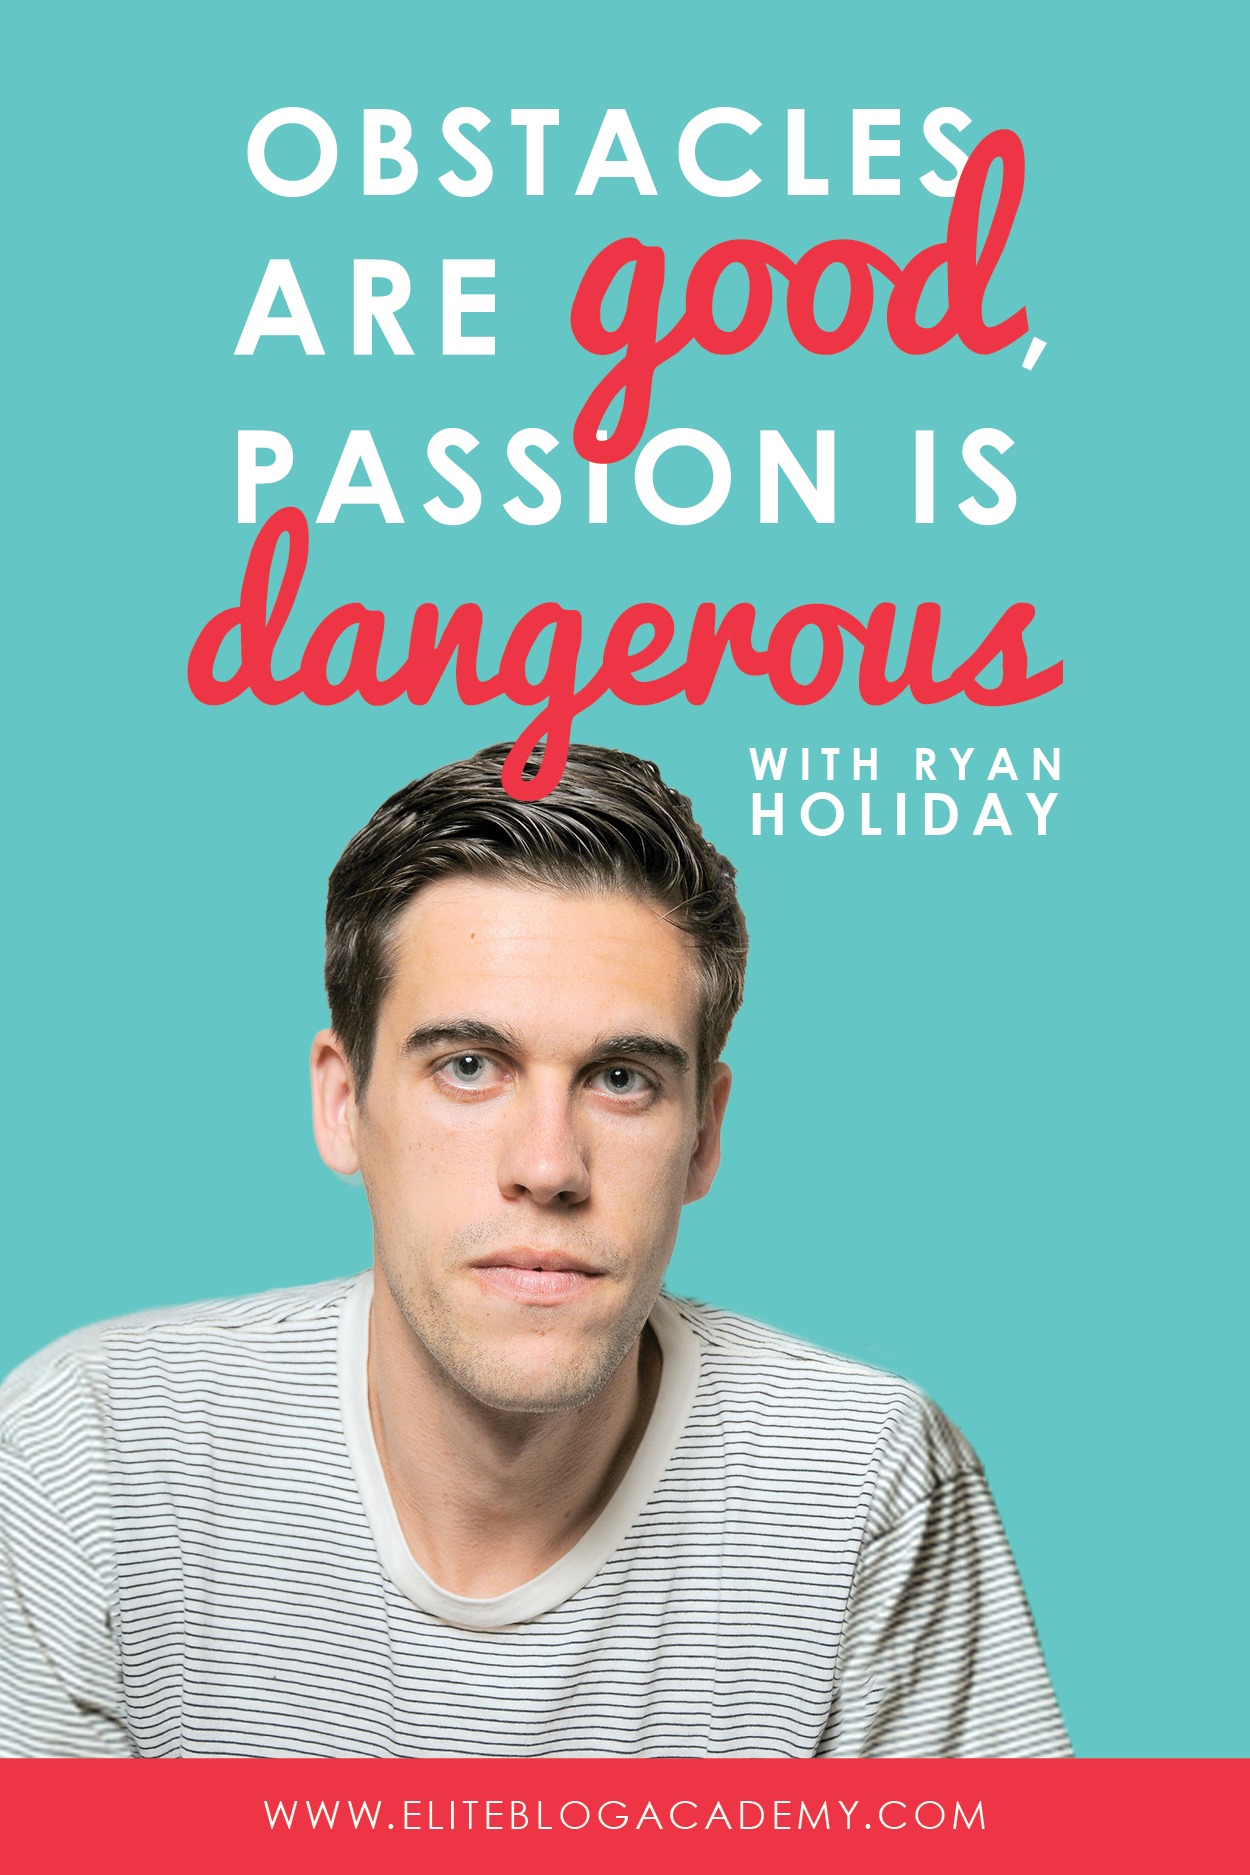 Obstacles Are Good, Passion is Dangerous: My Interview with Ryan Holiday - Elite Blog Academy